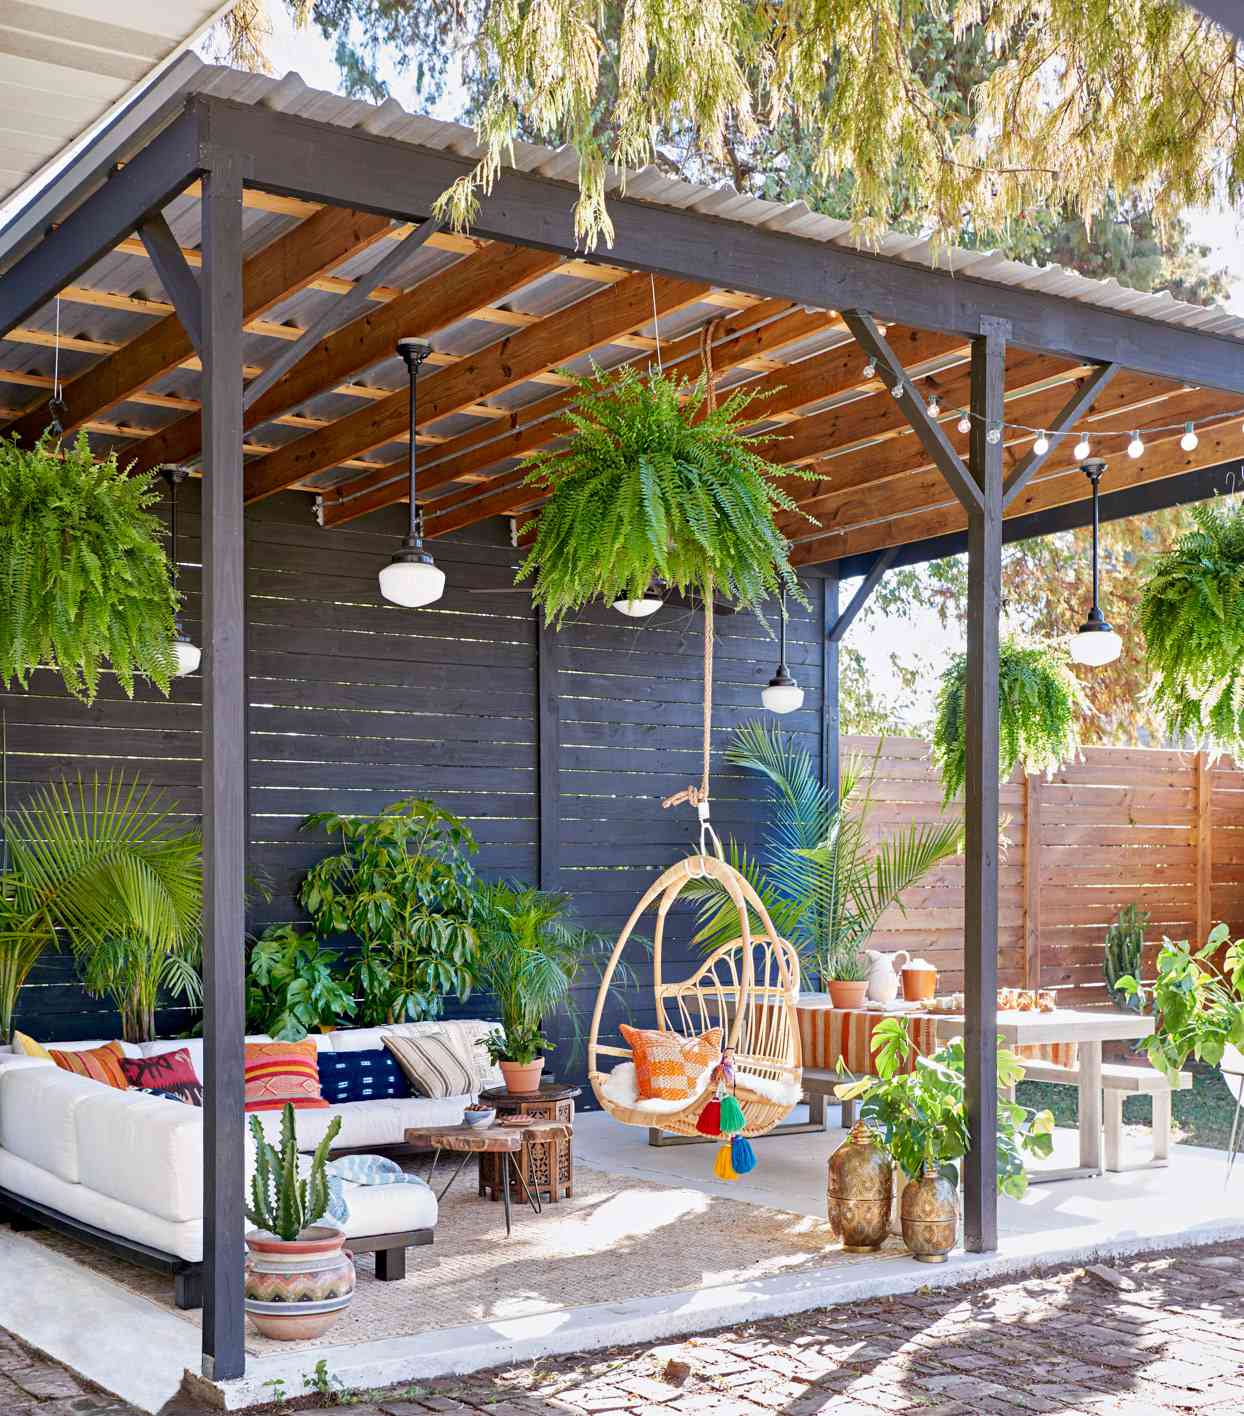 25 Colorful Backyard Decorating Ideas | Better Homes & Gardens